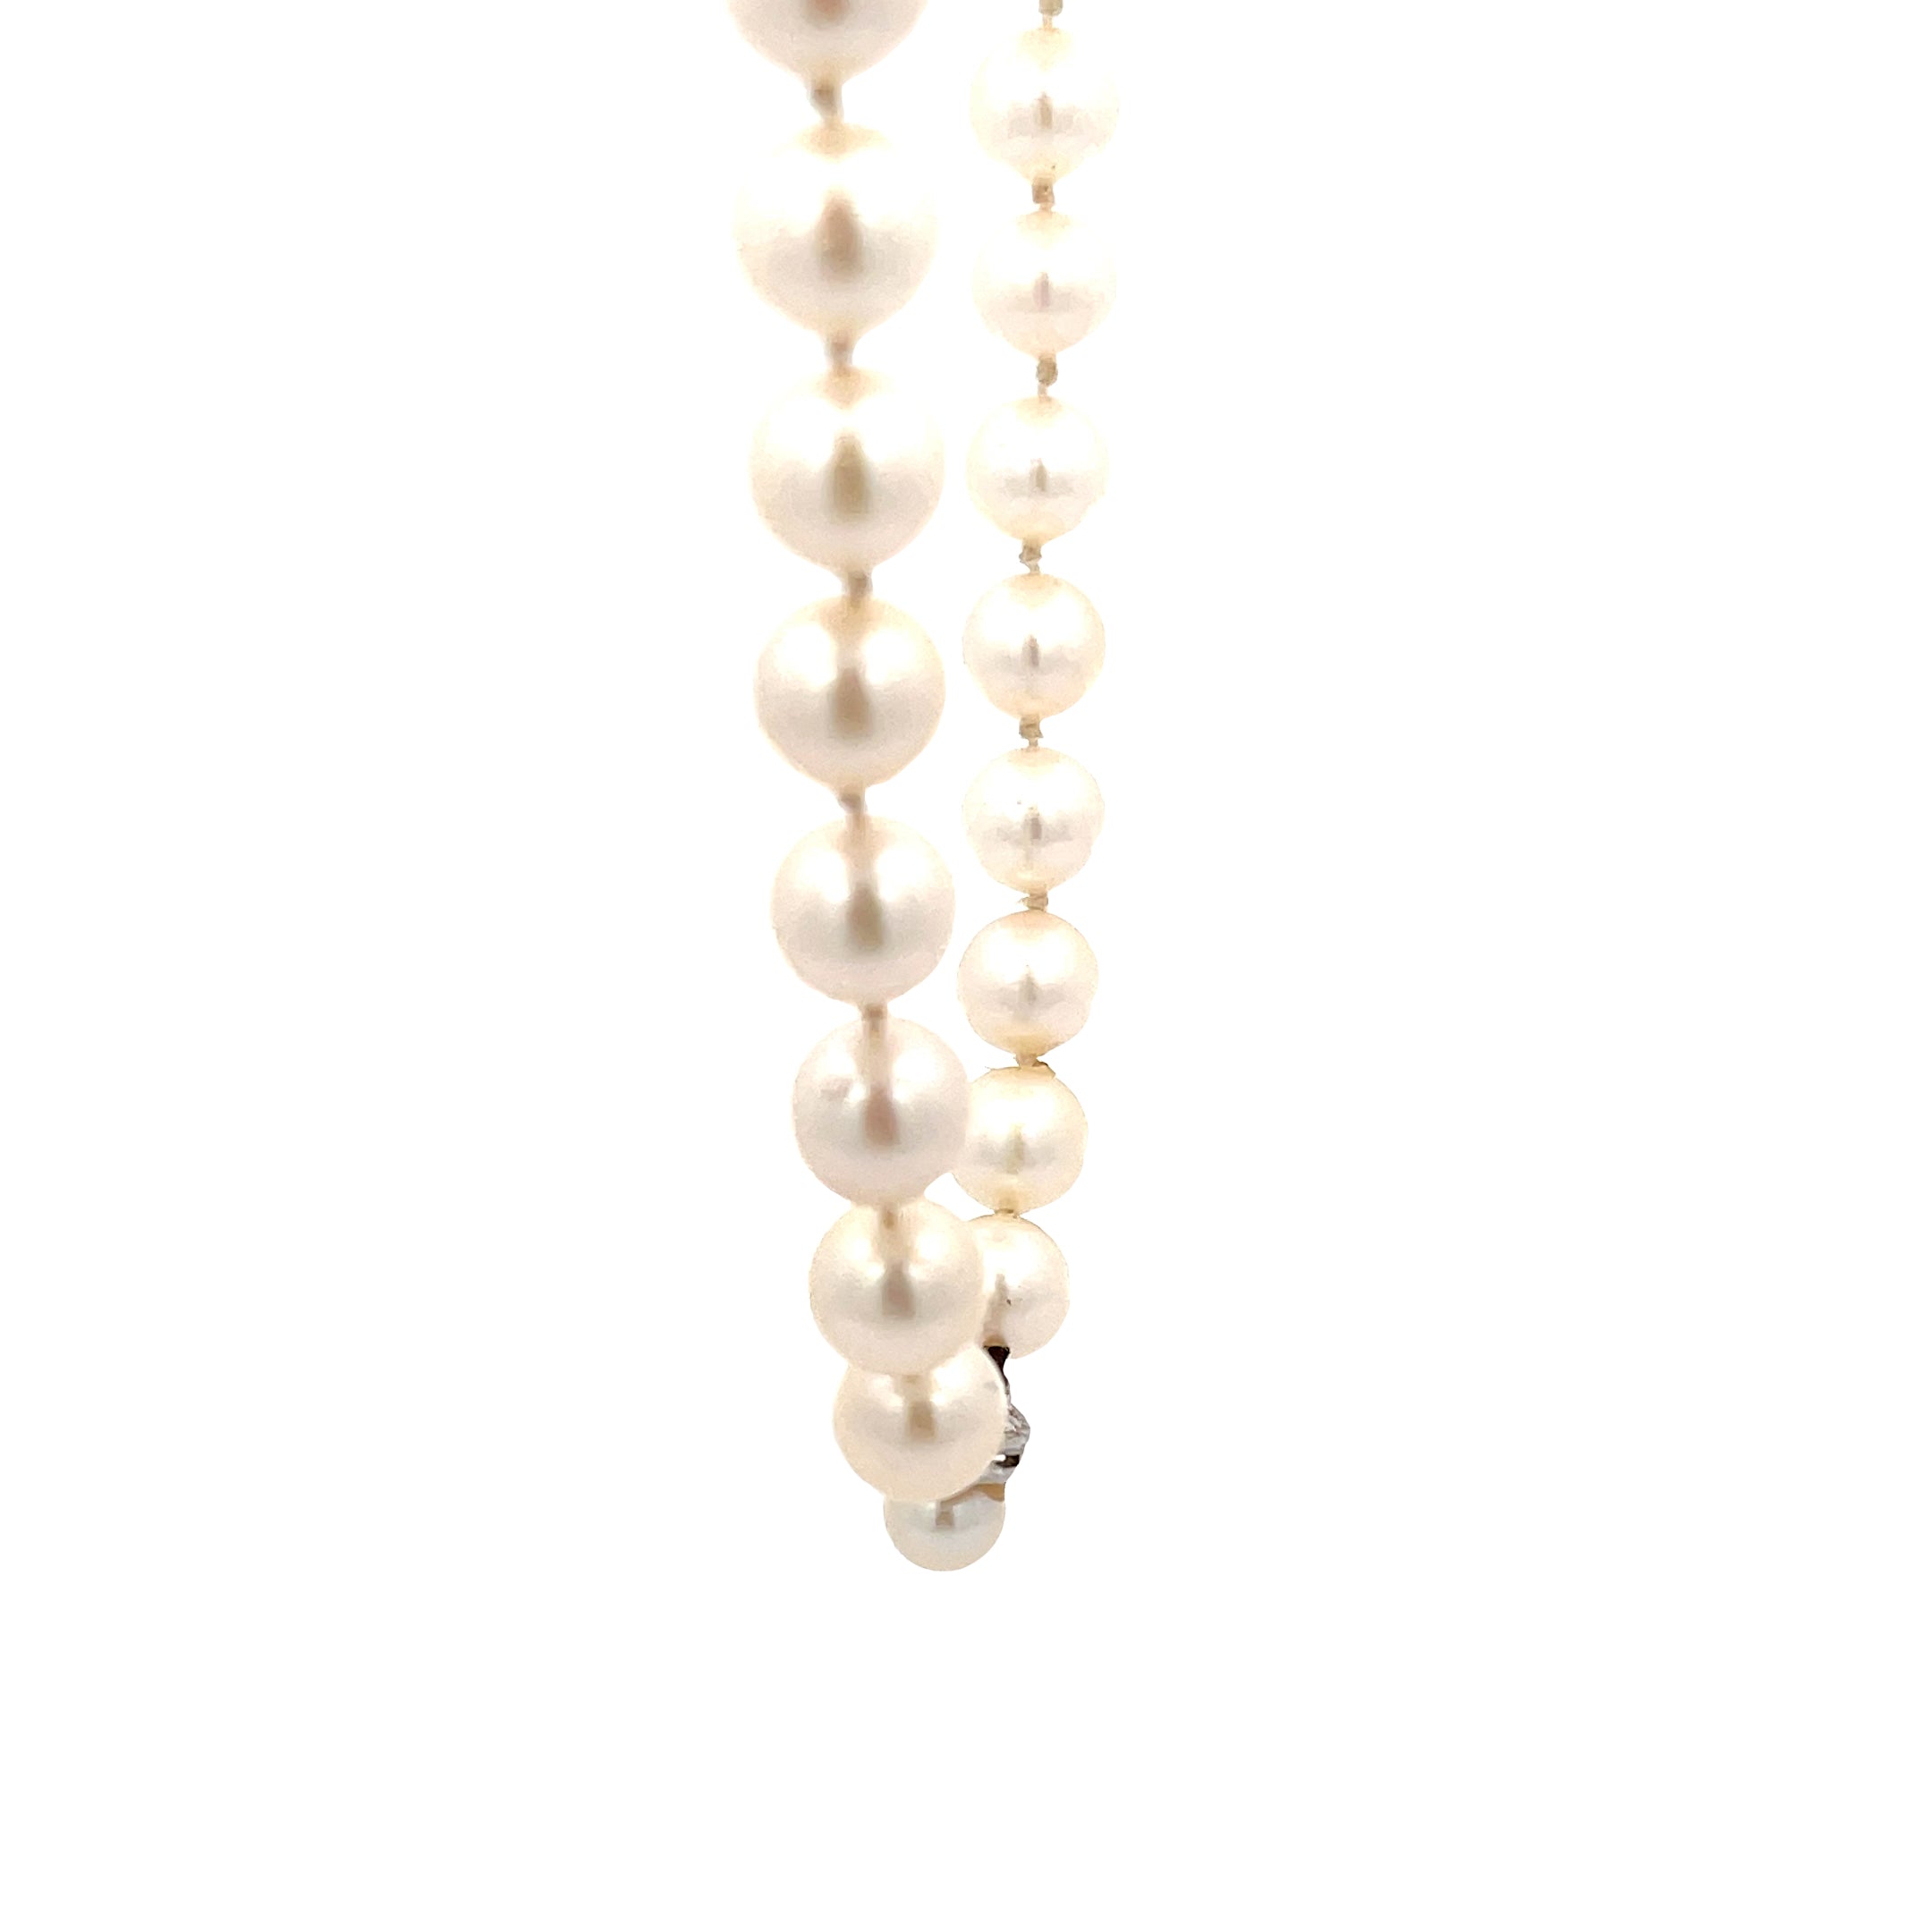 Ladies 14k white gold Cultured Pearl Necklace